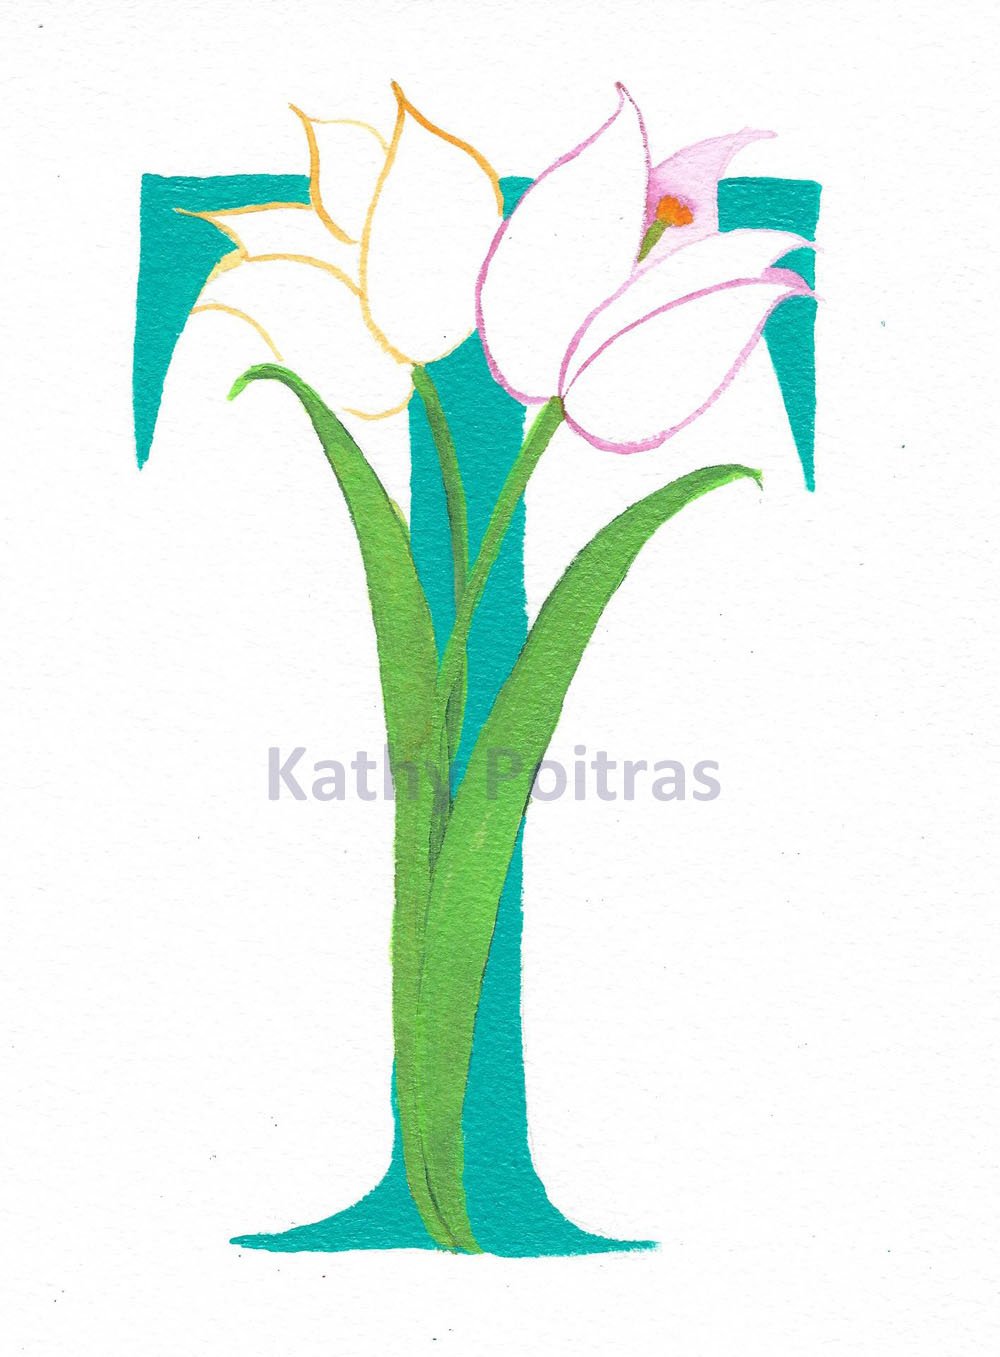 Hand made photographic Personalized Greeting Card. Illustrated Letter T for Tulips by artist Kathy Poitras. Blank inside